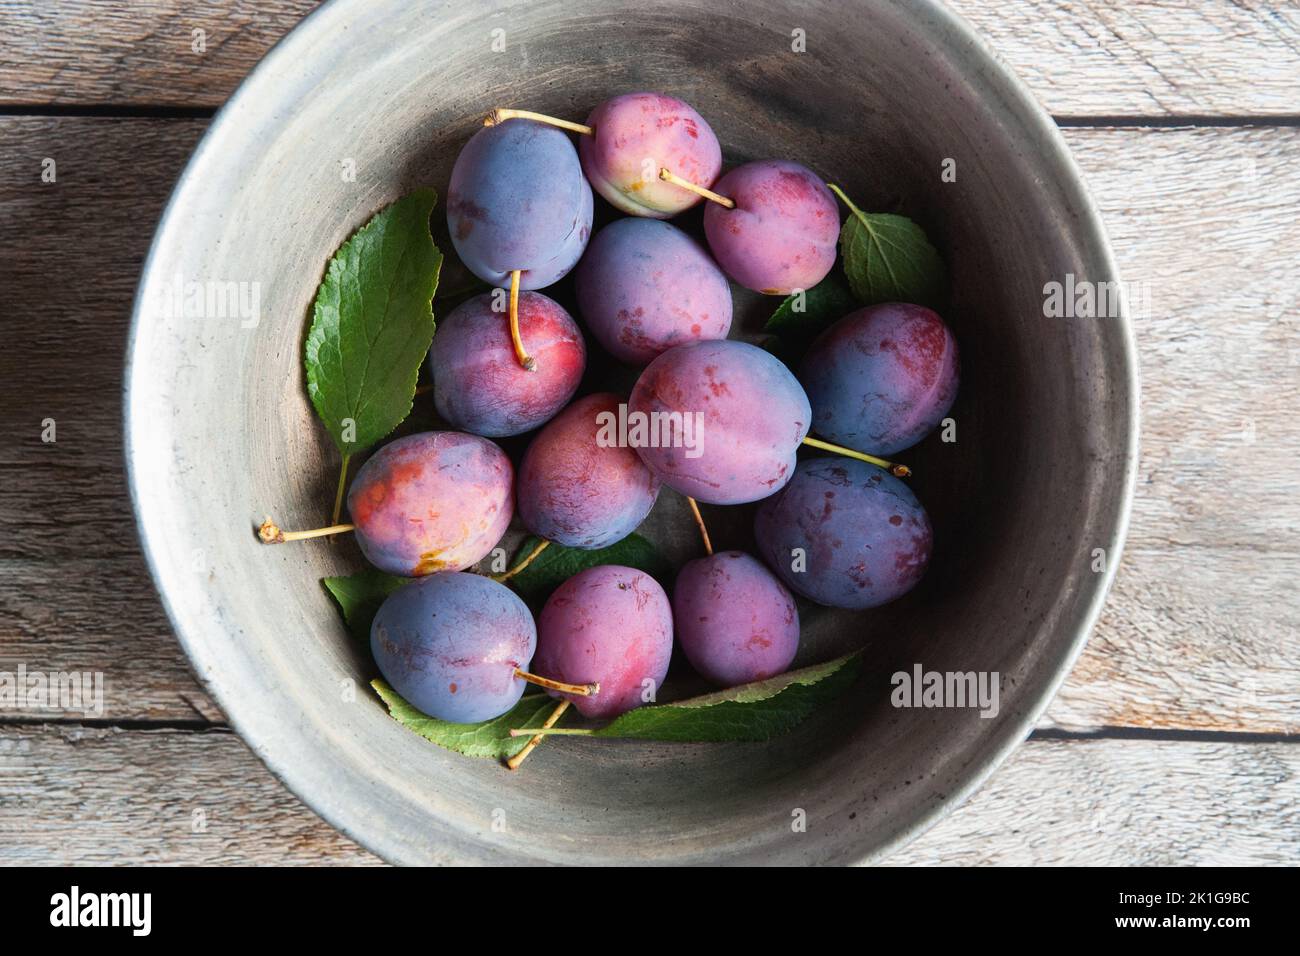 Plums in old bowl on table, harvested prunes, overhead view Stock Photo